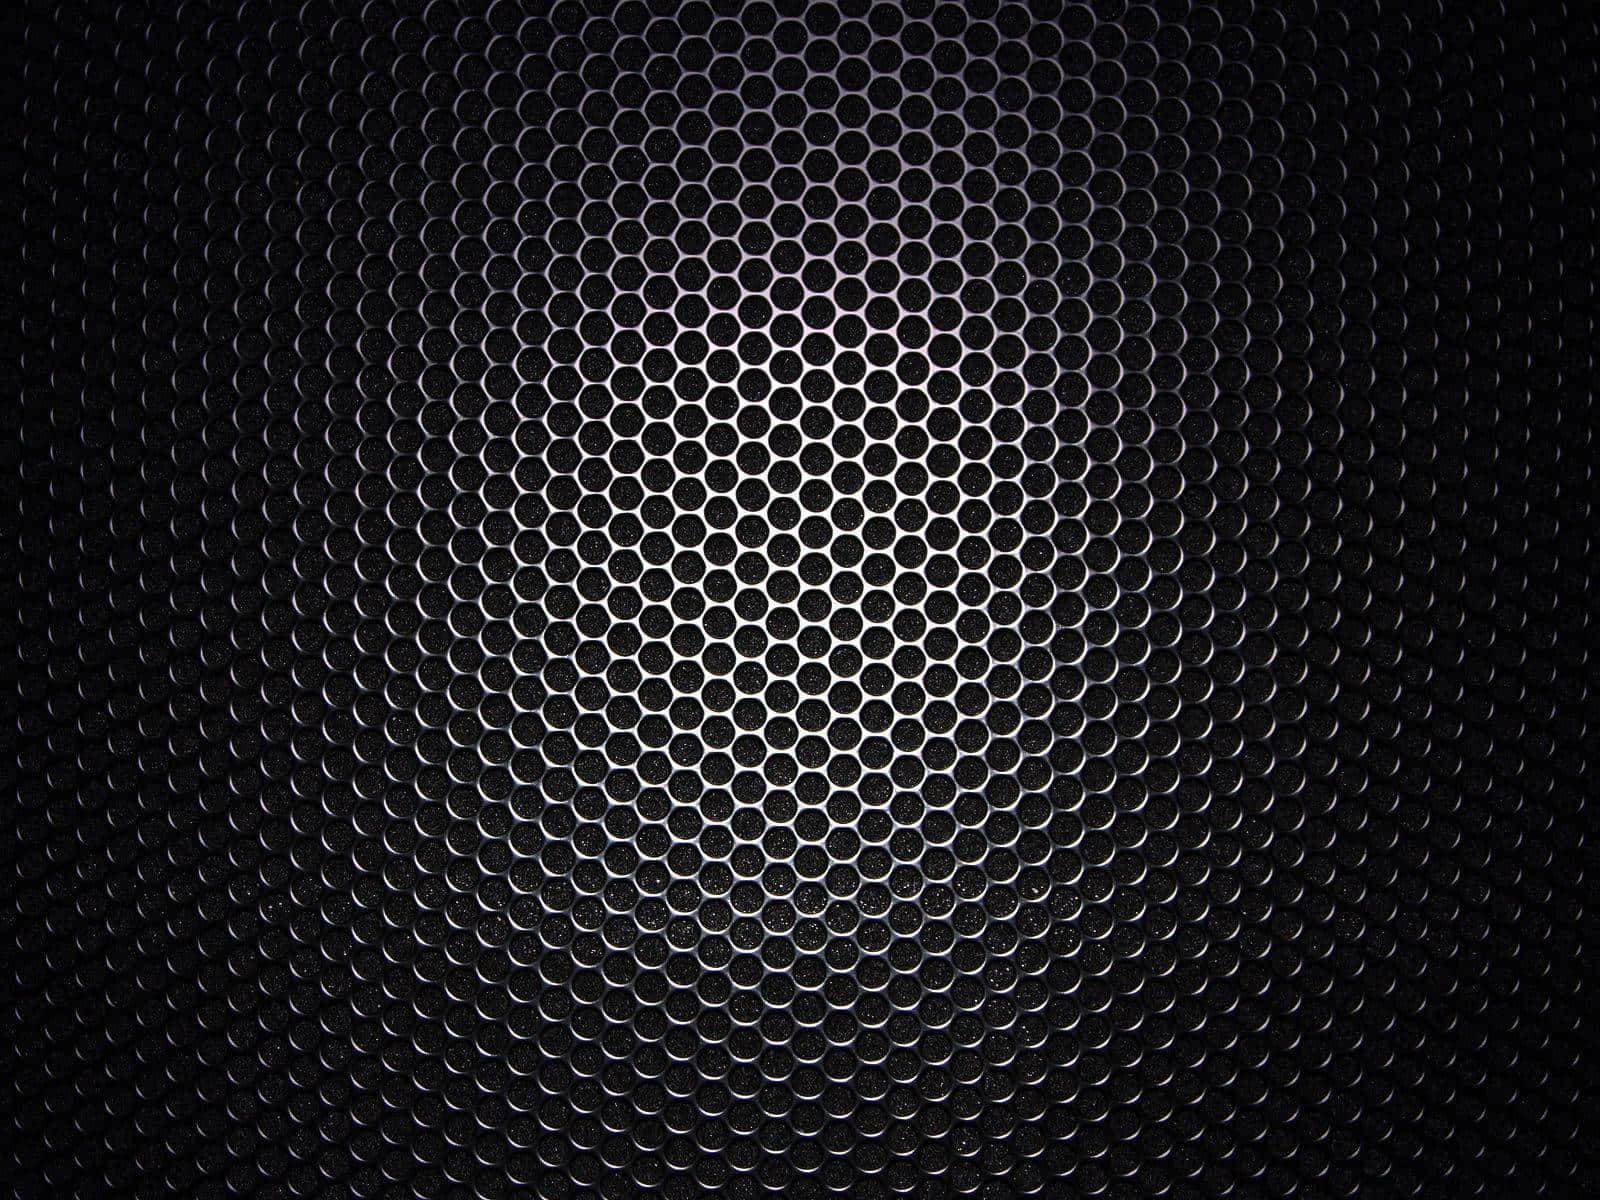 A Black Metal Grille With Holes In It Wallpaper